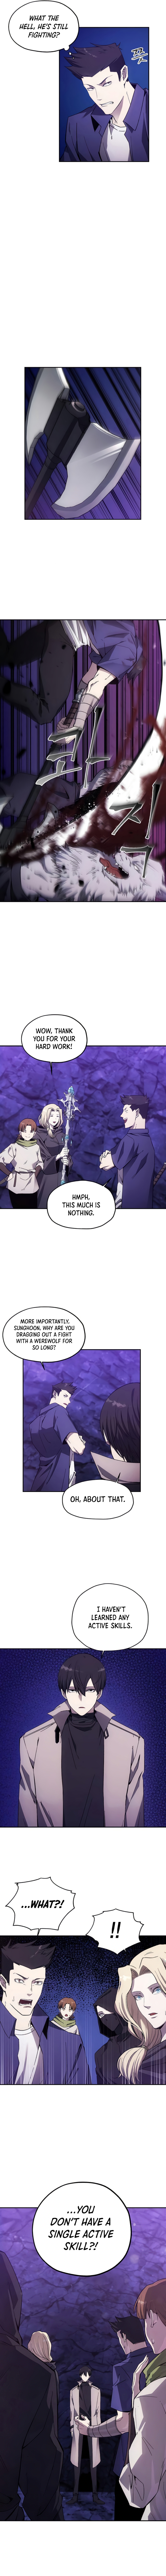 How to Live as a Villain Chapter 8 - Page 6